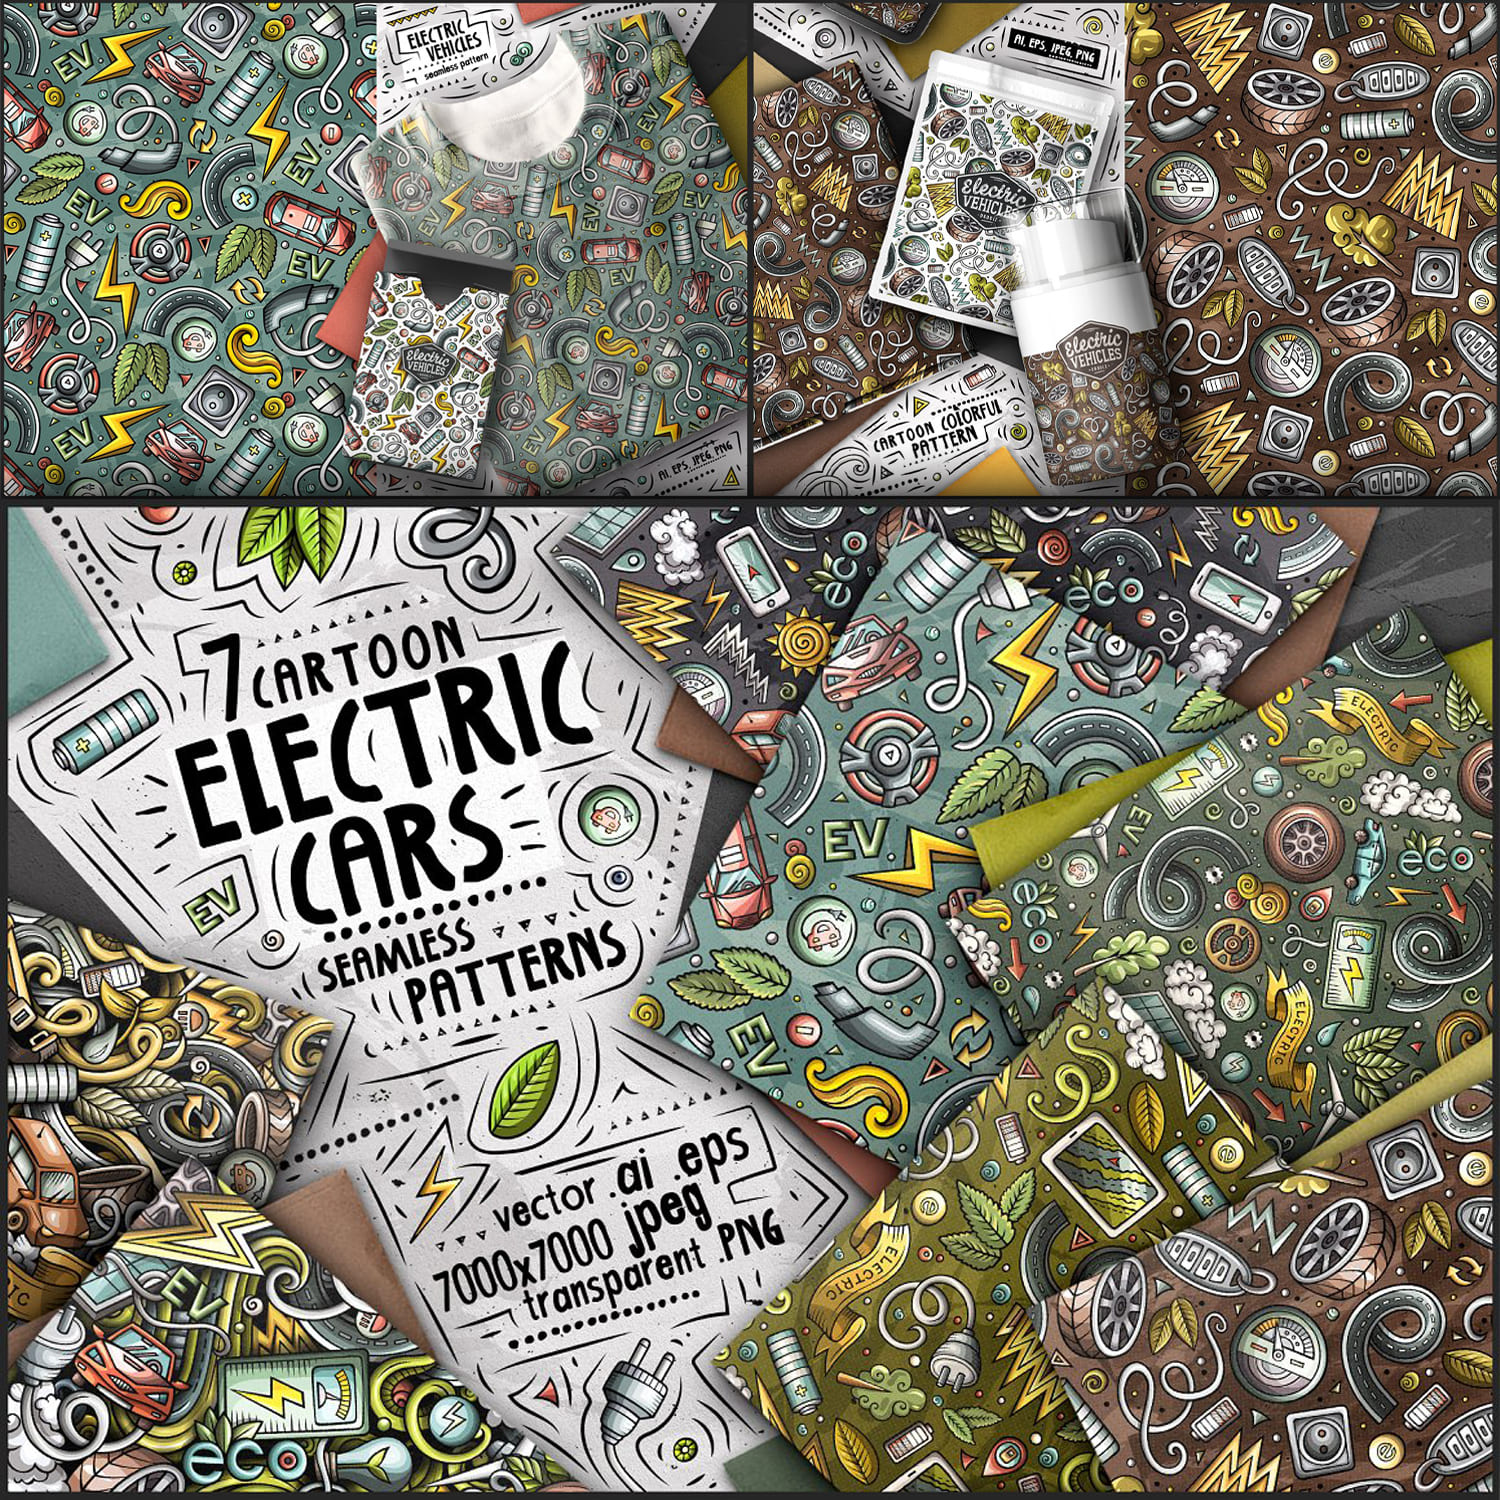 7 Electric Cars Seamless Patterns 1500 1500 2.